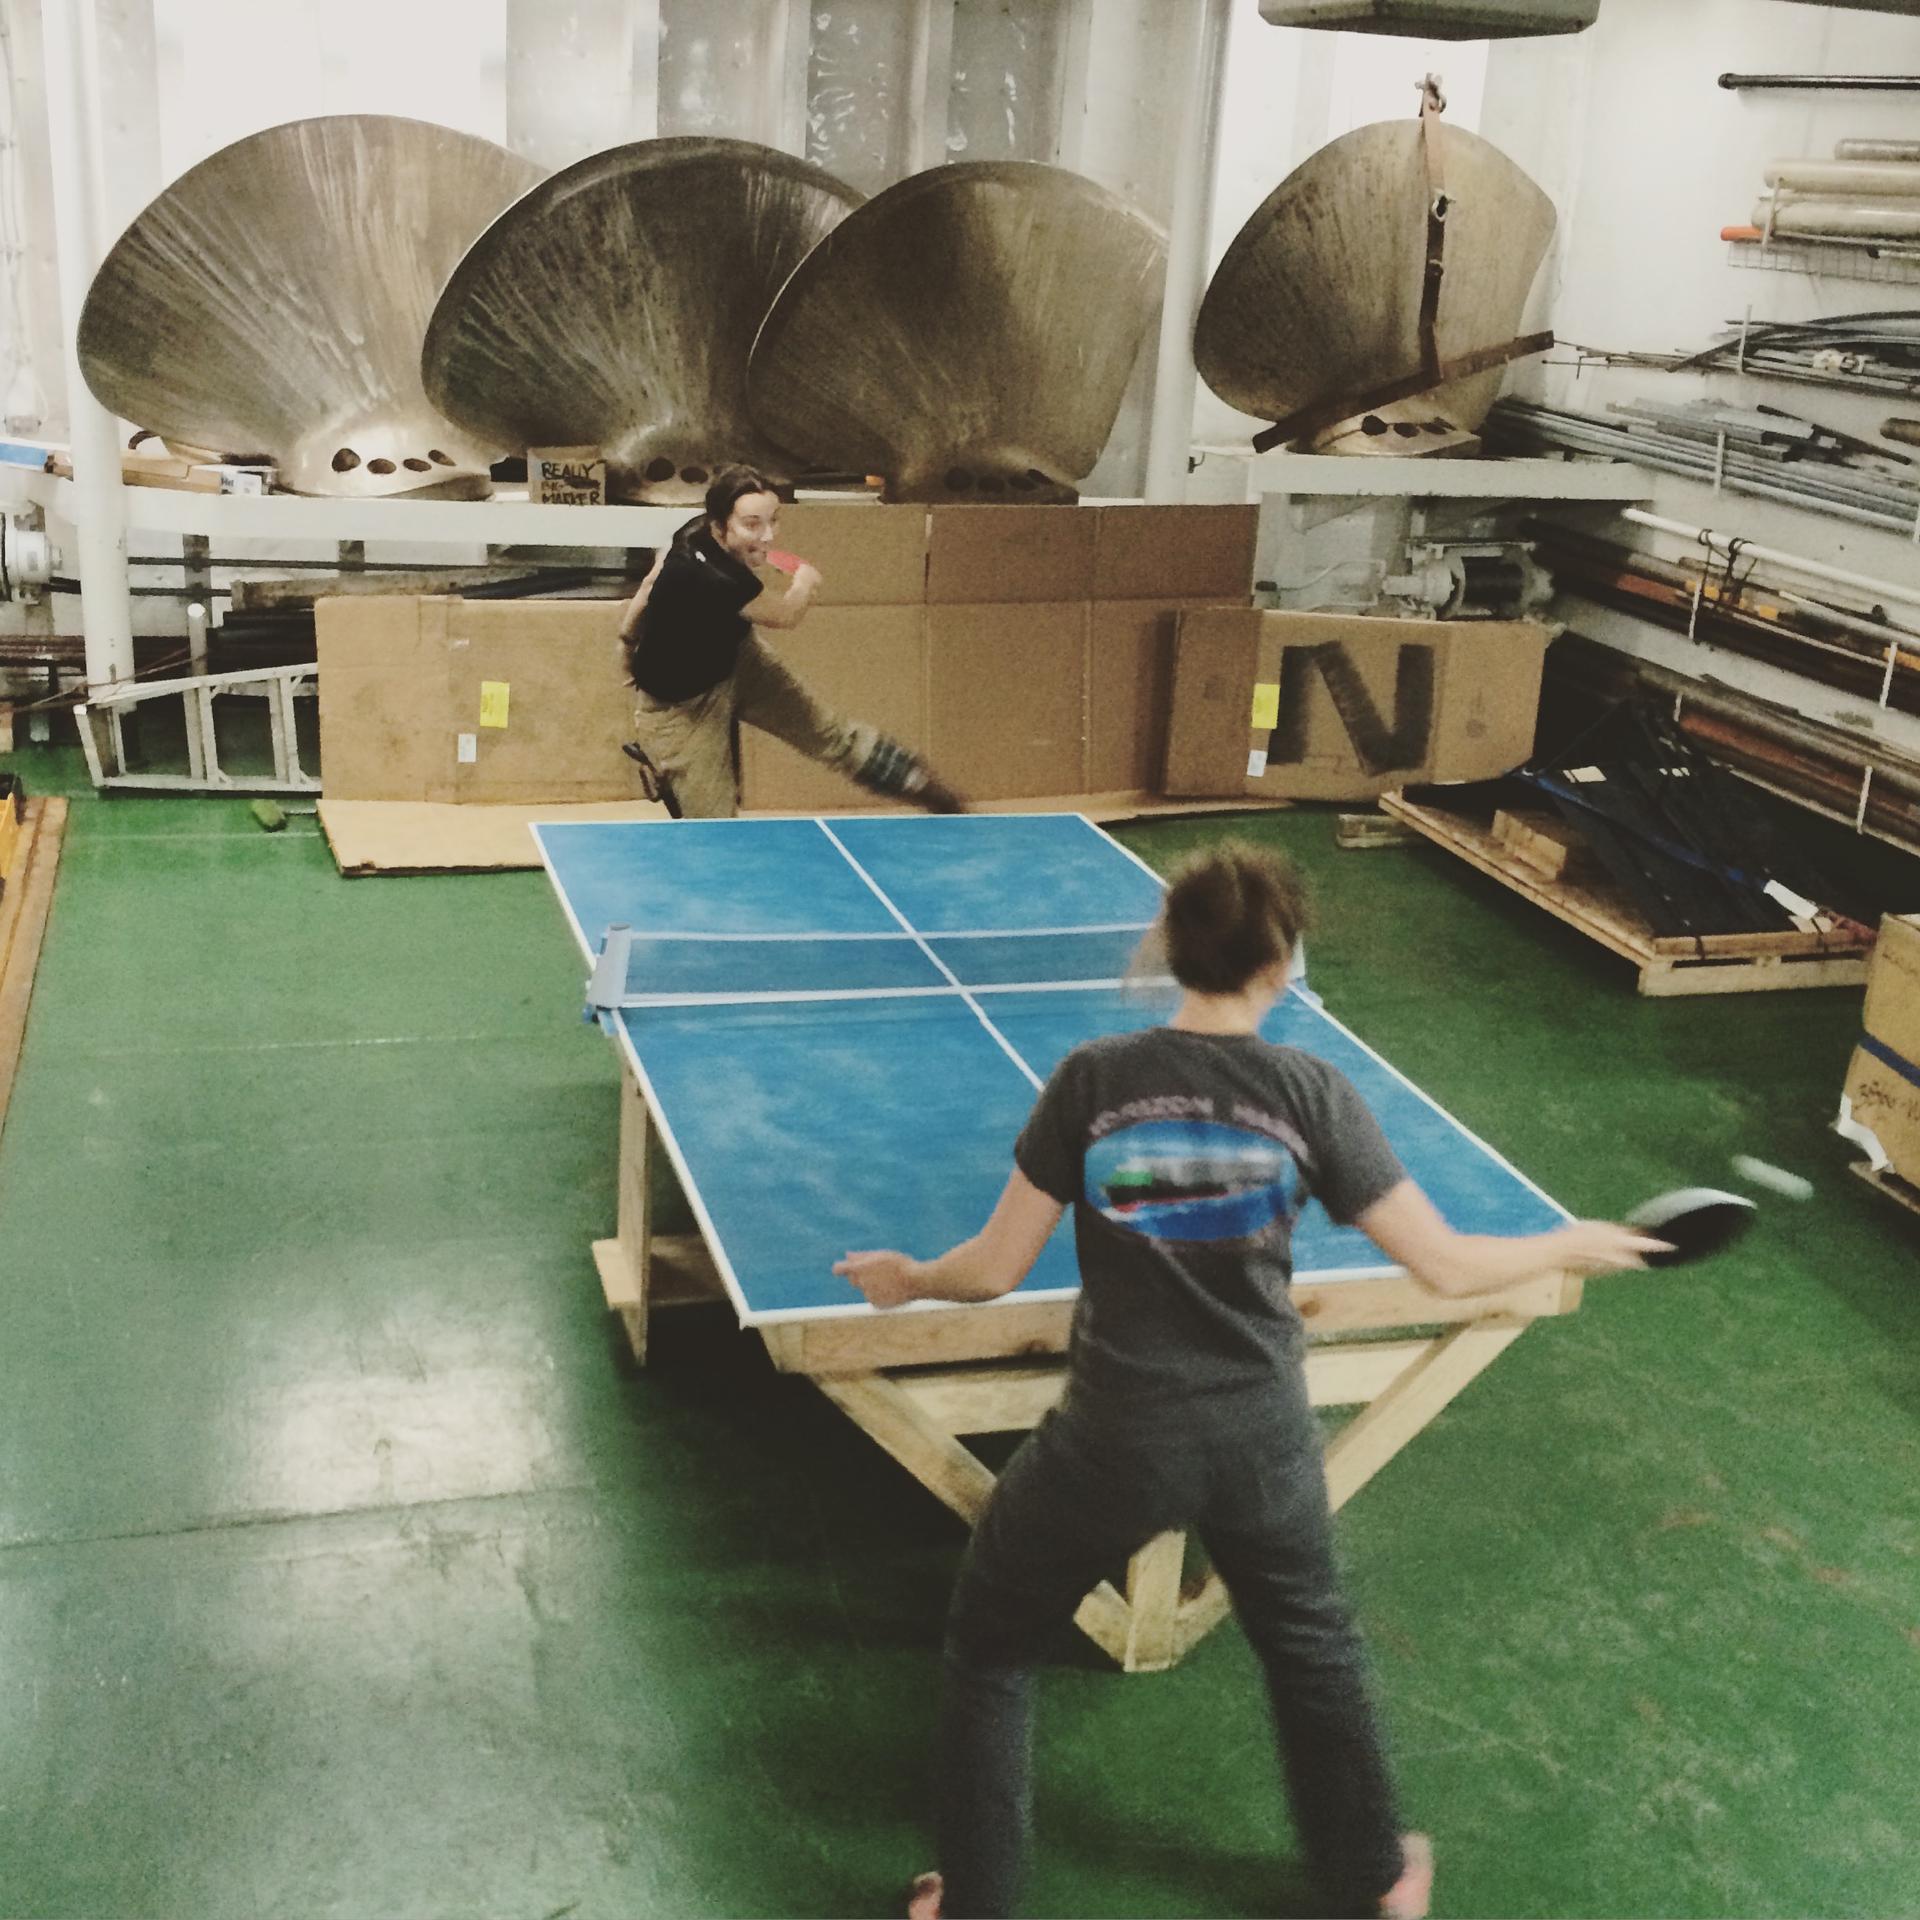 Cargo hold ping-pong